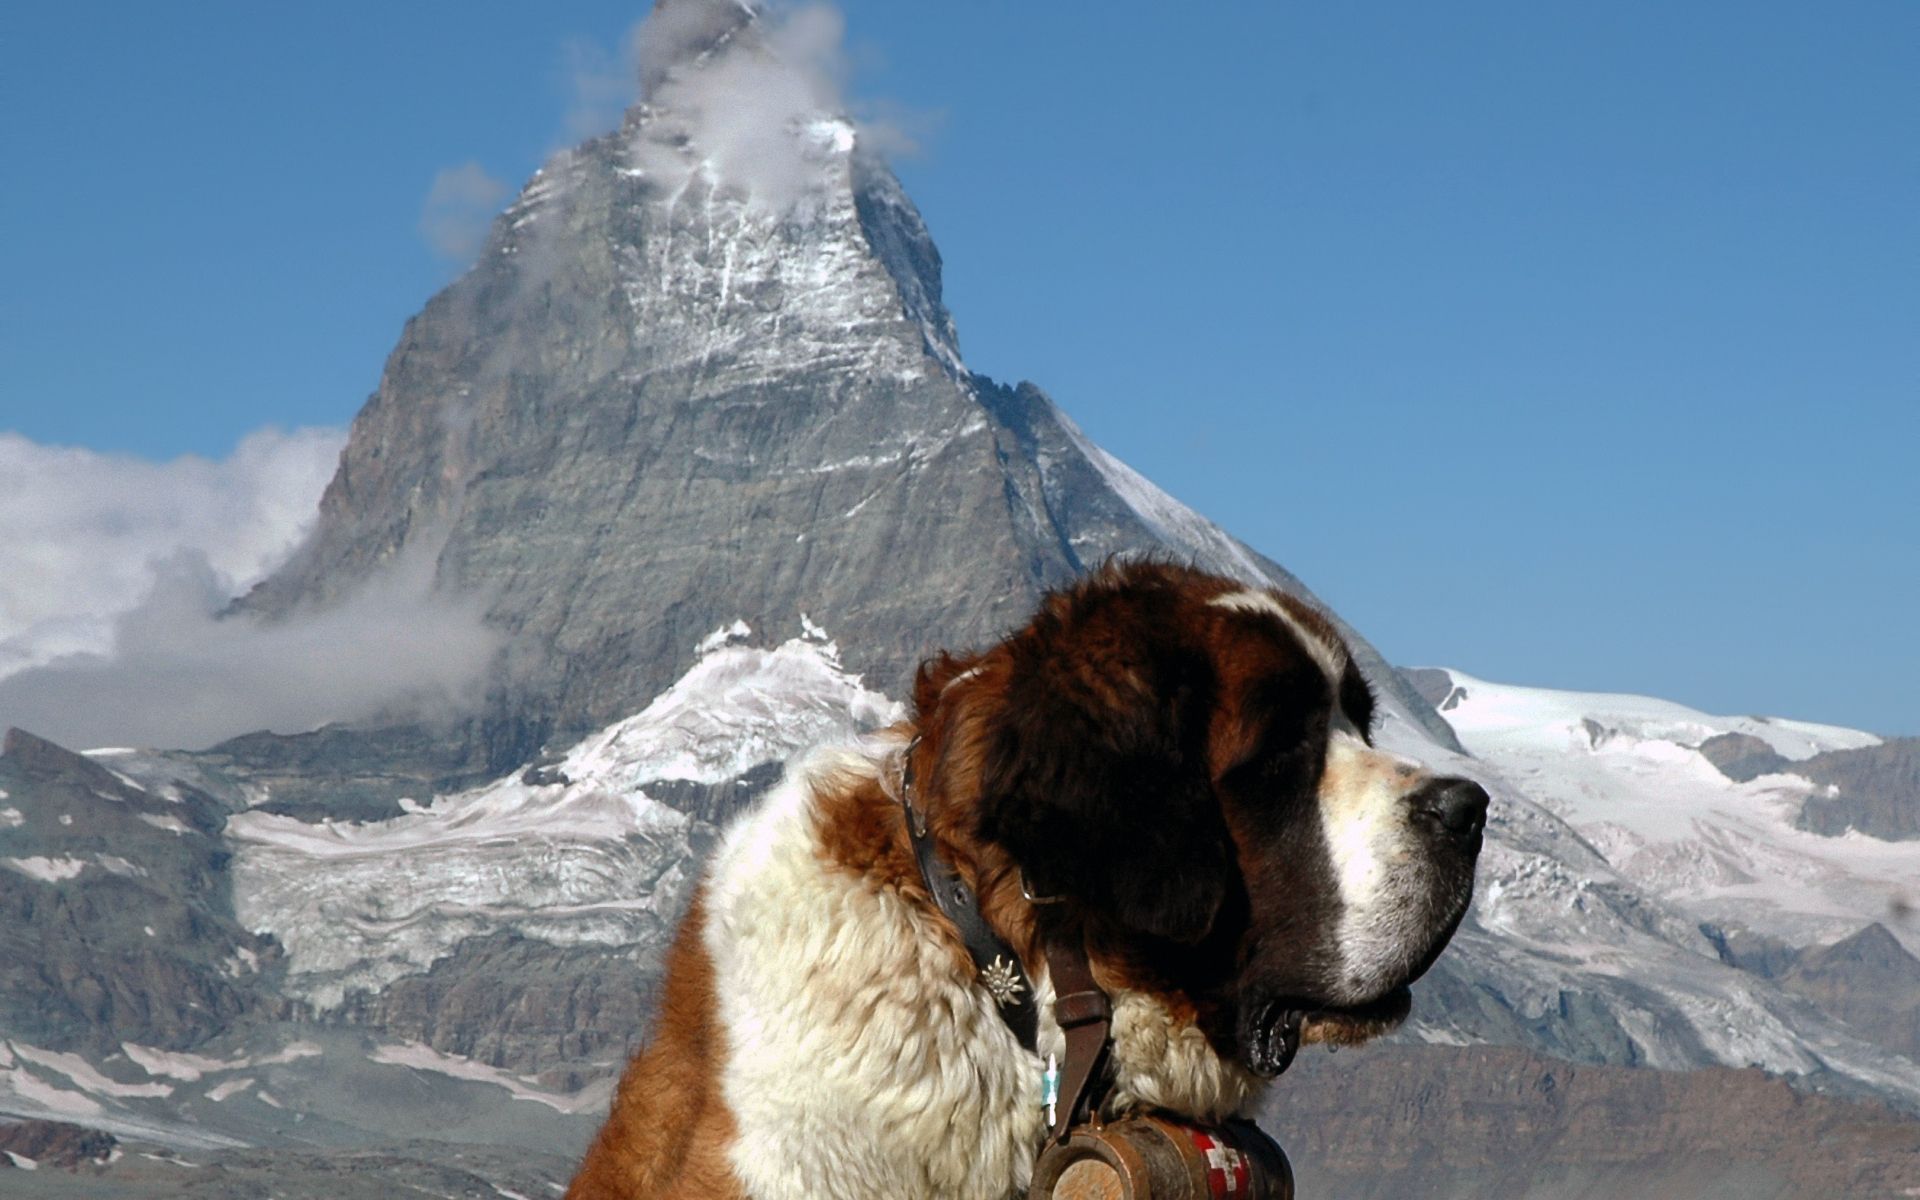 St. Bernard dog wallpapers and images - wallpapers, pictures, photos